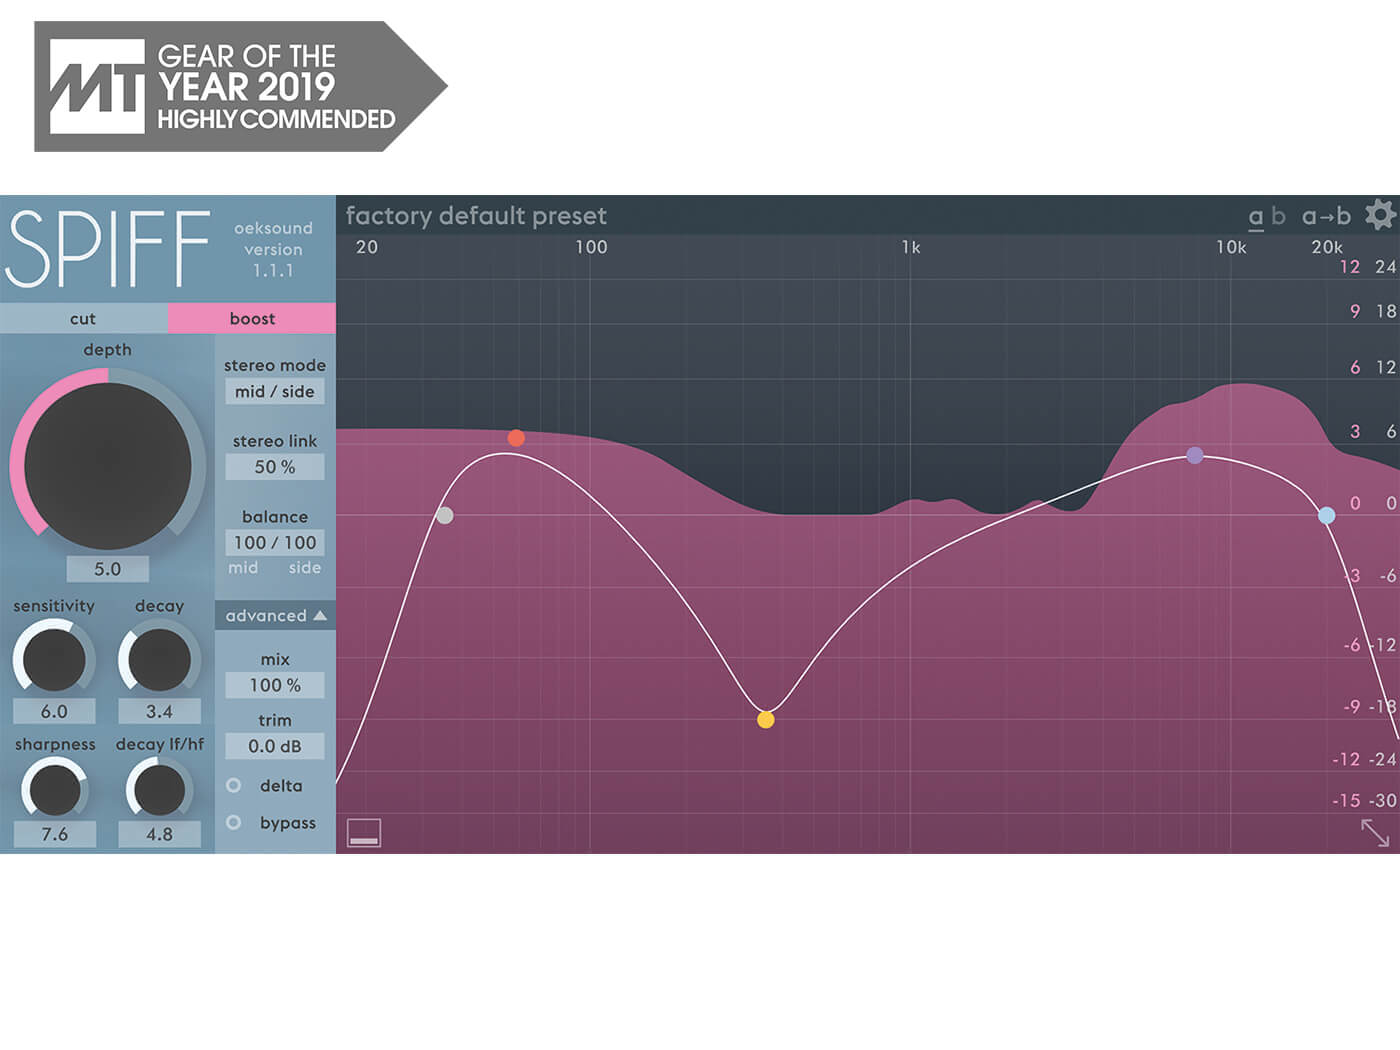 izotope rx free trial